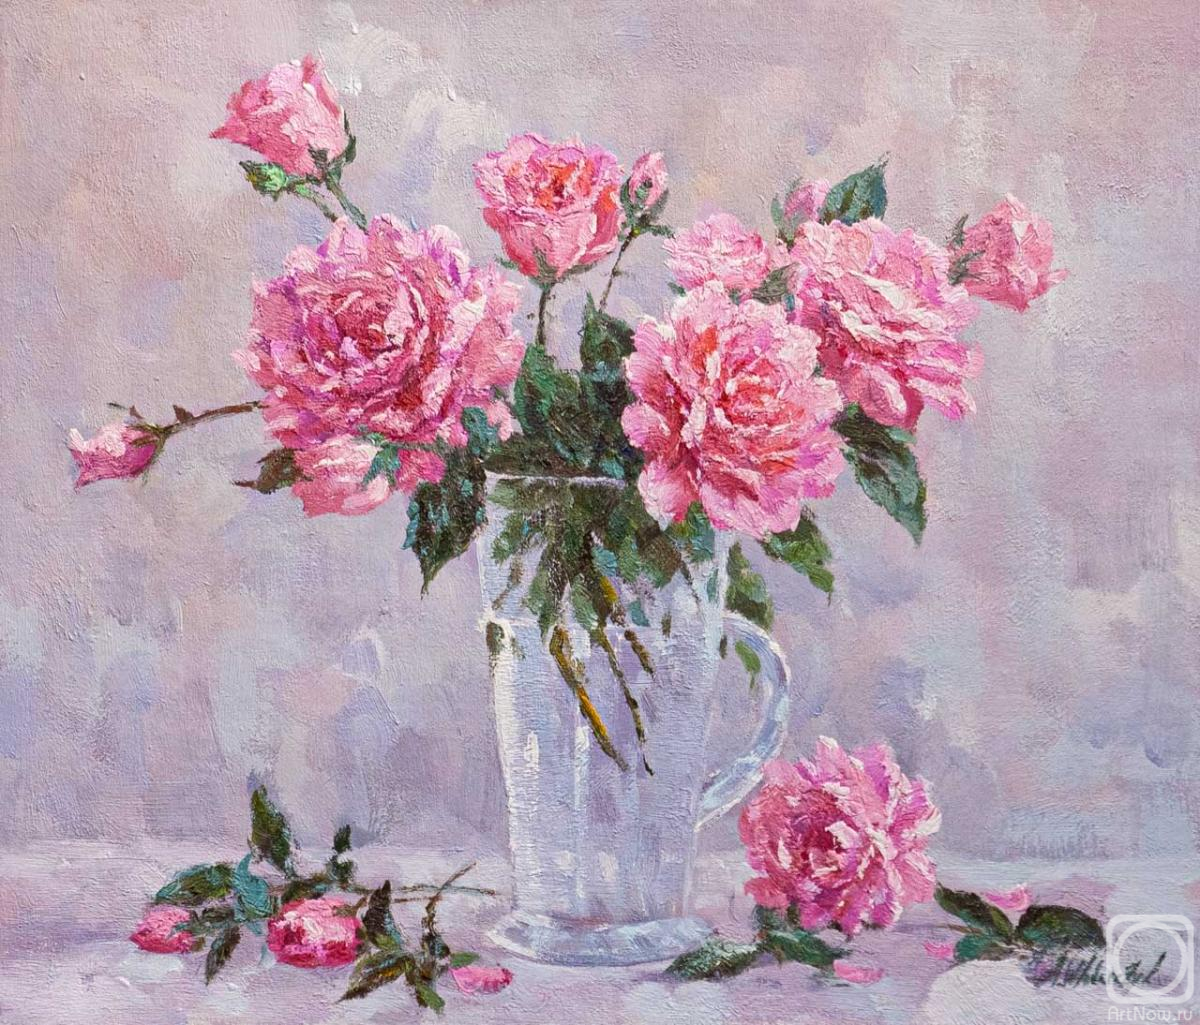 Vlodarchik Andjei. Poetry of the Rose